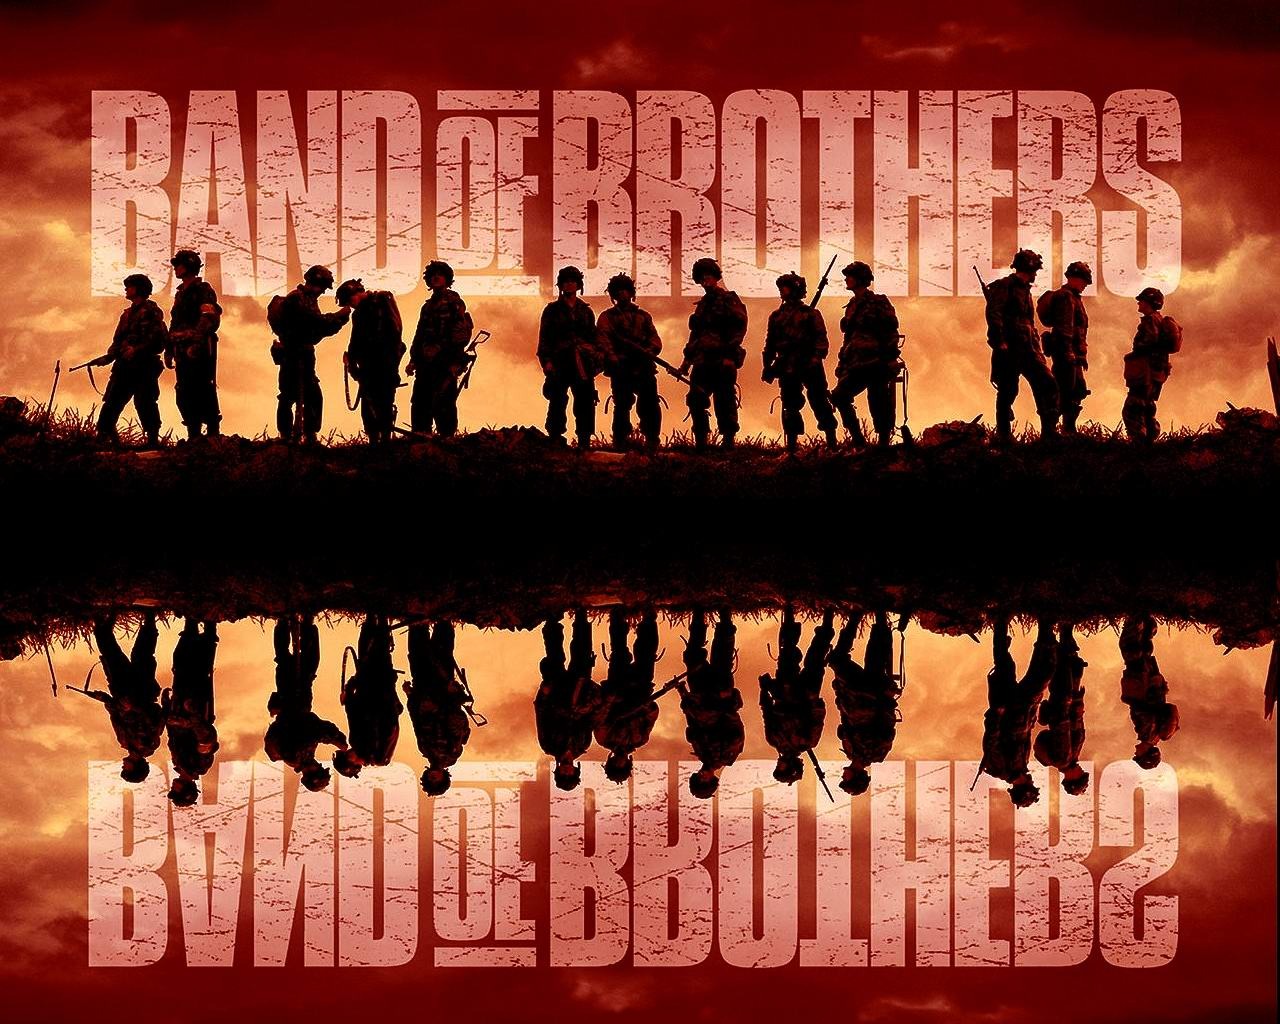 Band_of_Brothers_04_1280x1024.jpg